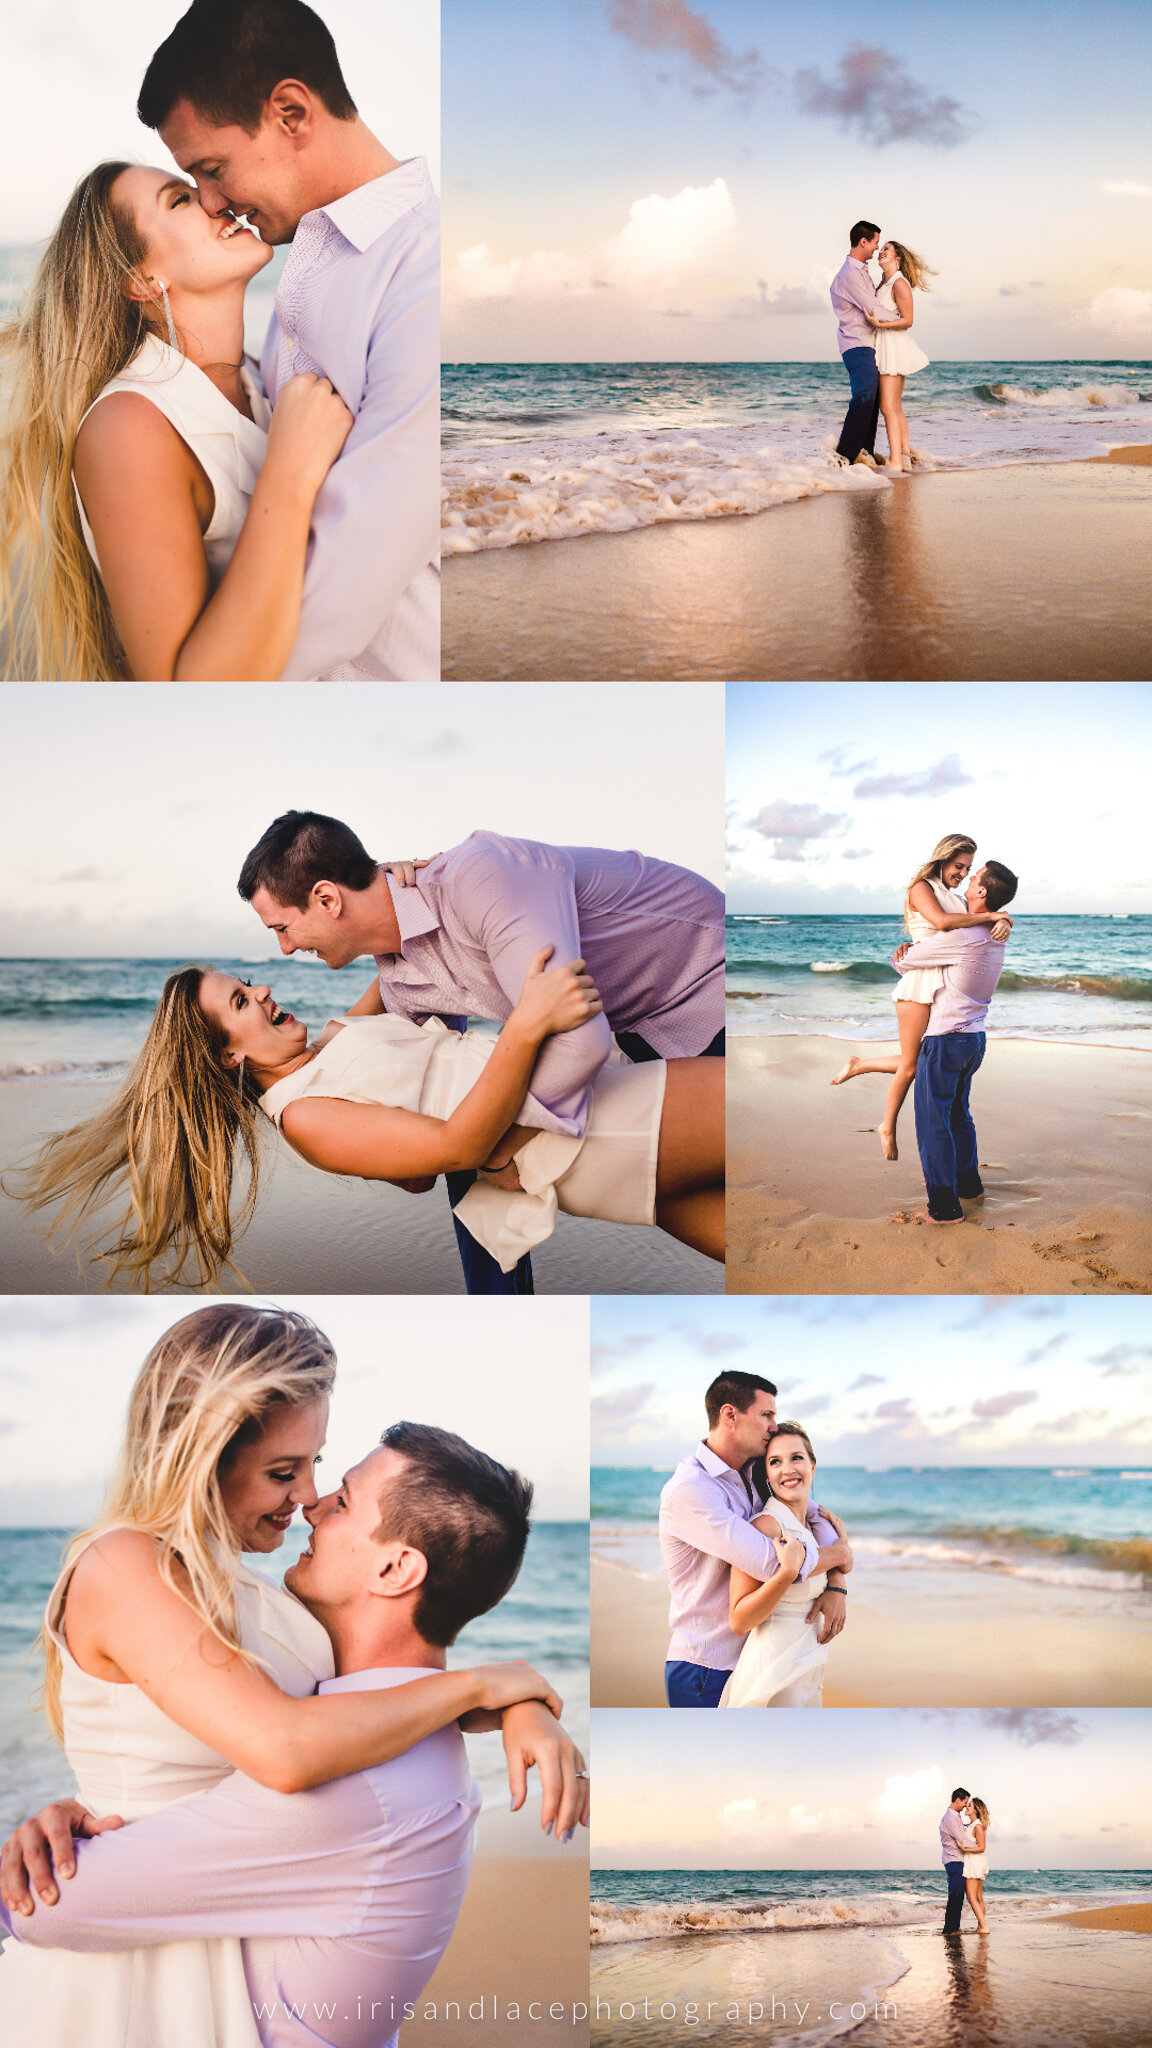 SF Bay Area Travel and Destination Engagement Photographer  |  Iris and Lace Photography 